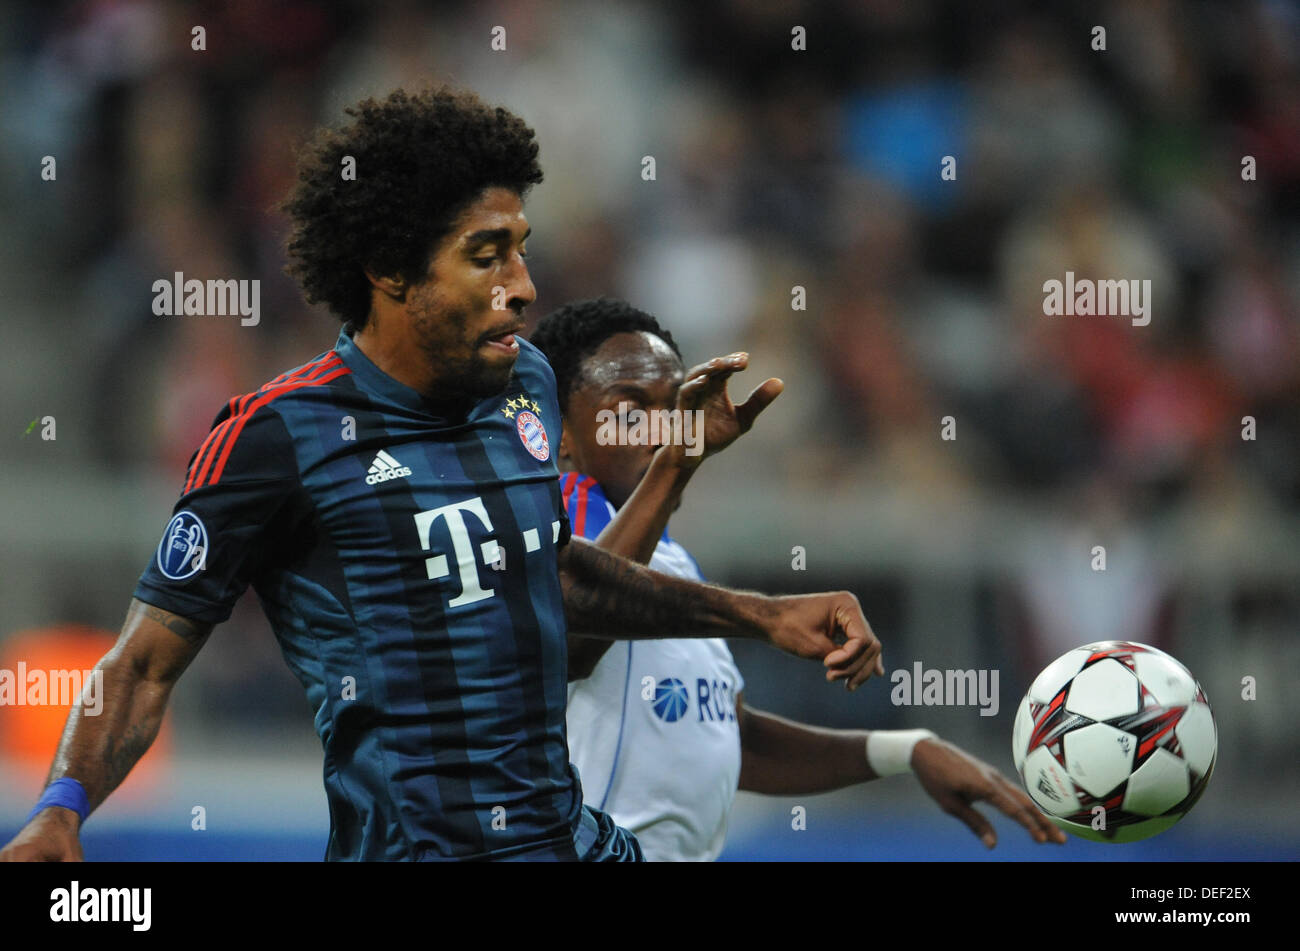 Munich, Germany. 17th Sep, 2013. Munich's Dante (L) and Moscow's Ahmed Musa vie for the ball during the UEFA Champions League Group D soccer match between FC Bayern Munich and CSKA Moscow at München Arena in Munich, Germany, 17 September 2013. Photo: Andreas Gebert/dpa/Alamy Live News Stock Photo